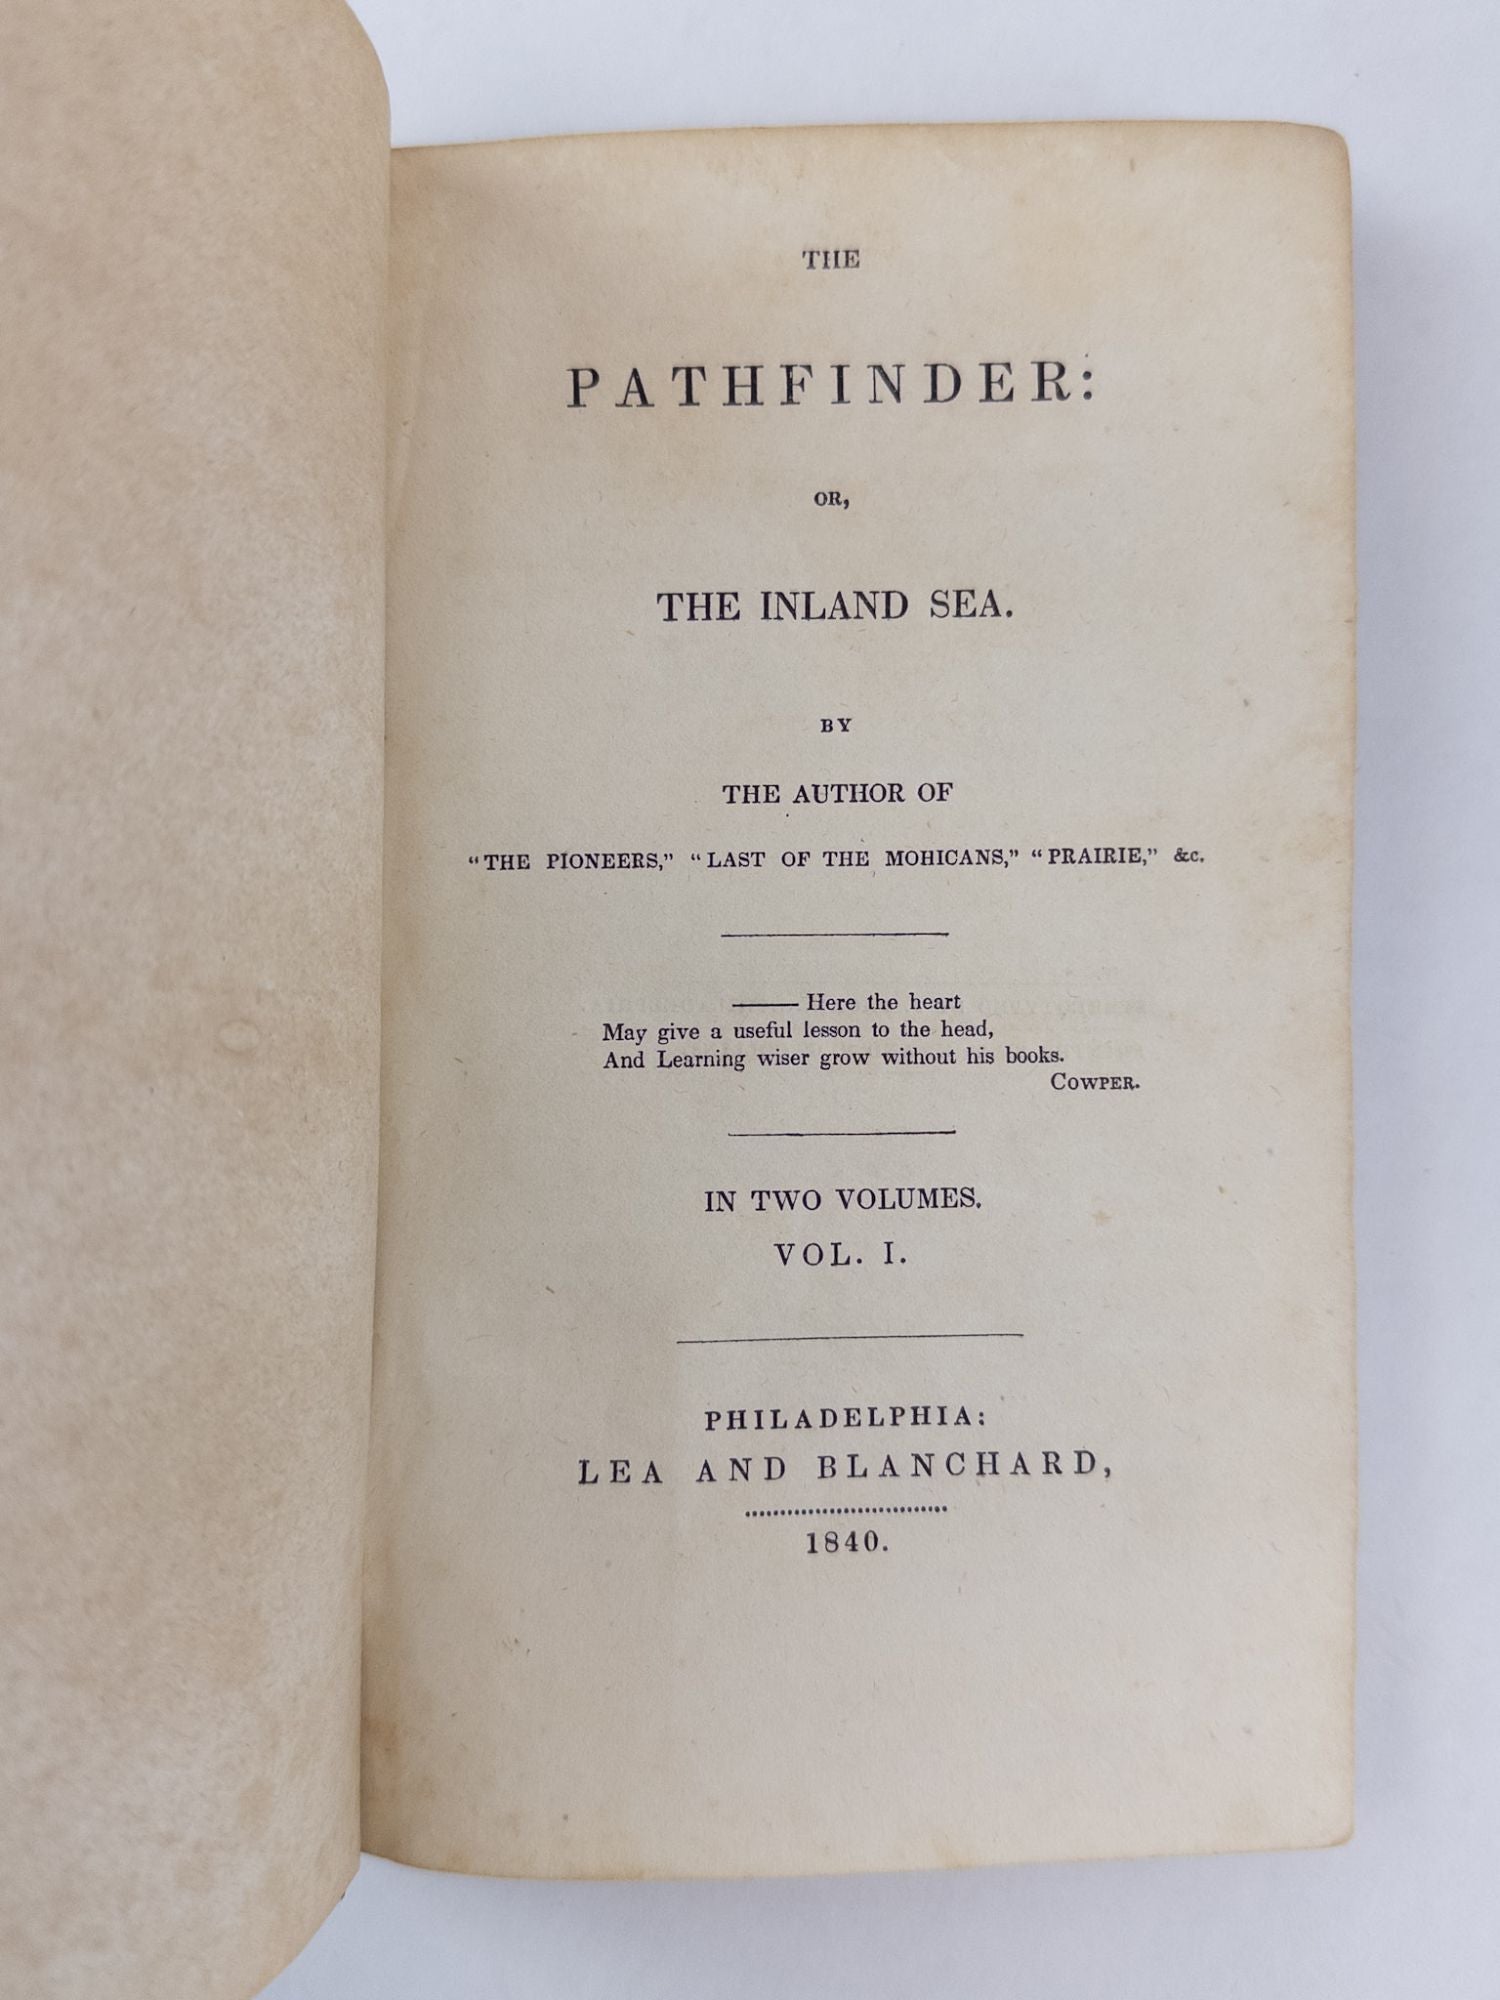 Product Image for THE PATHFINDER: OR, THE INLAND SEA [Two Volumes]